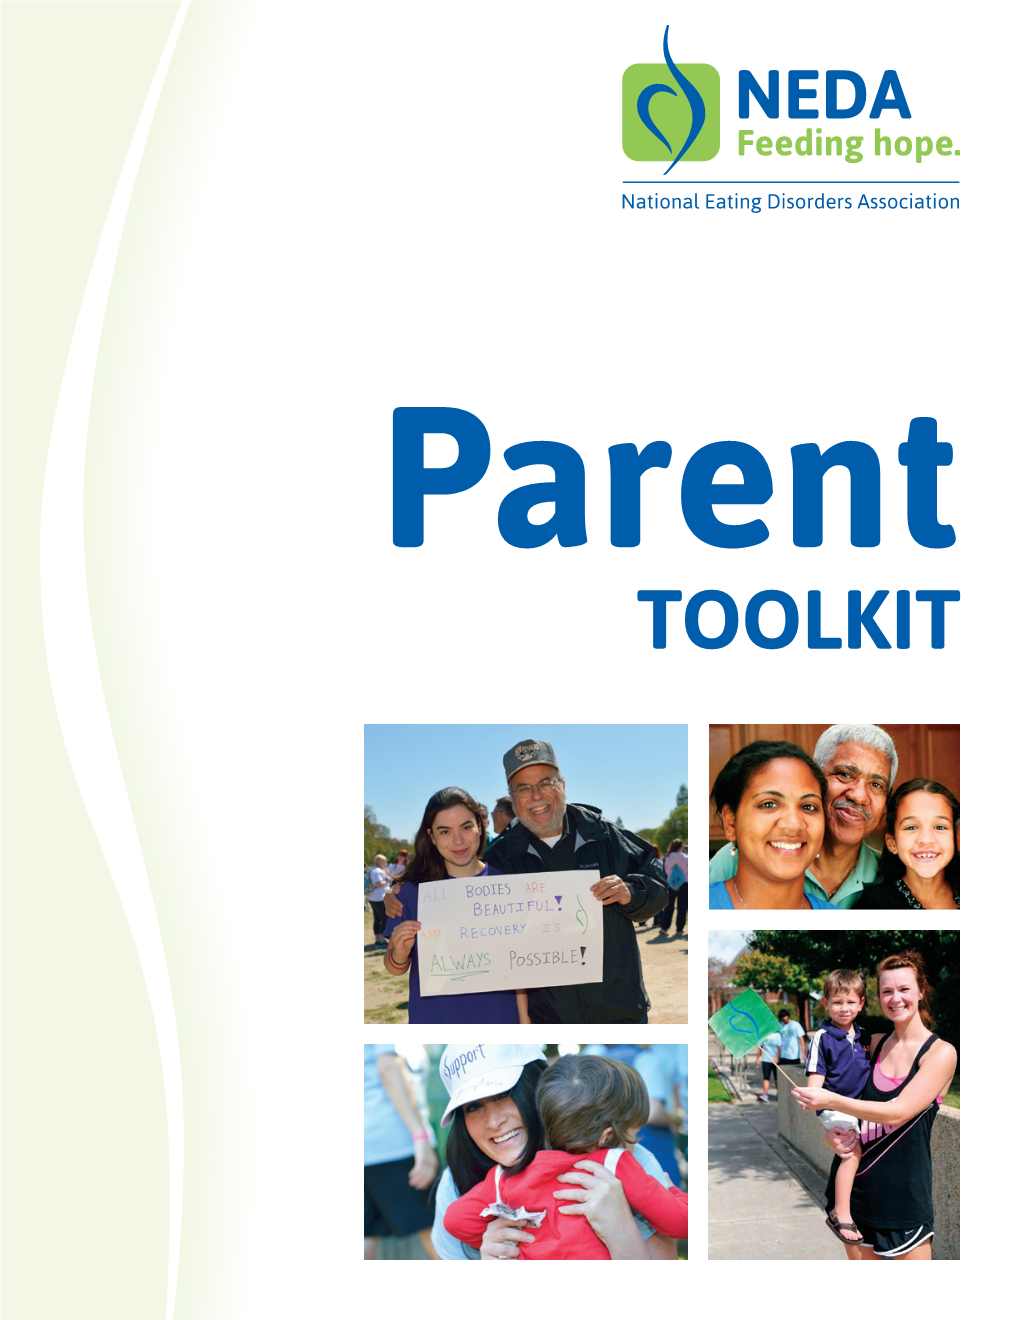 NEDA Parent Toolkit Was Created to Provide Some Will Be Disseminating the Toolkits